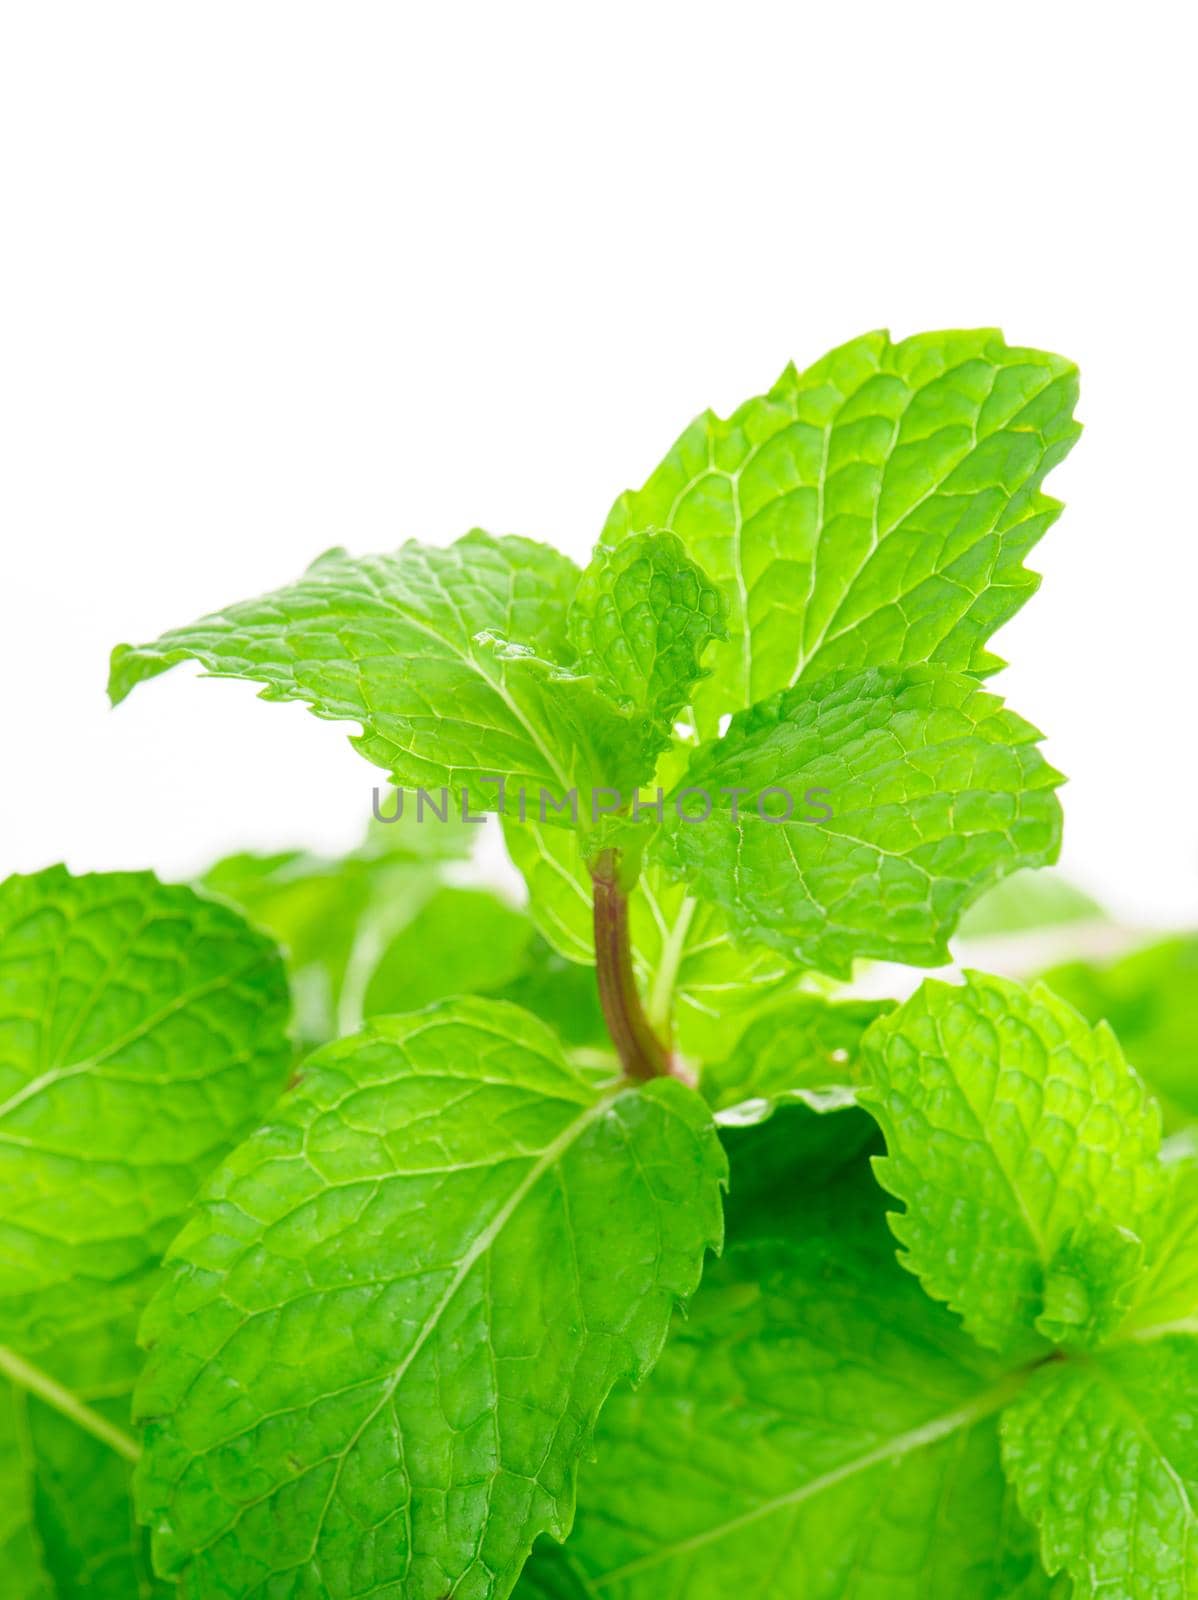 Fresh raw mint leaves isolated on white background